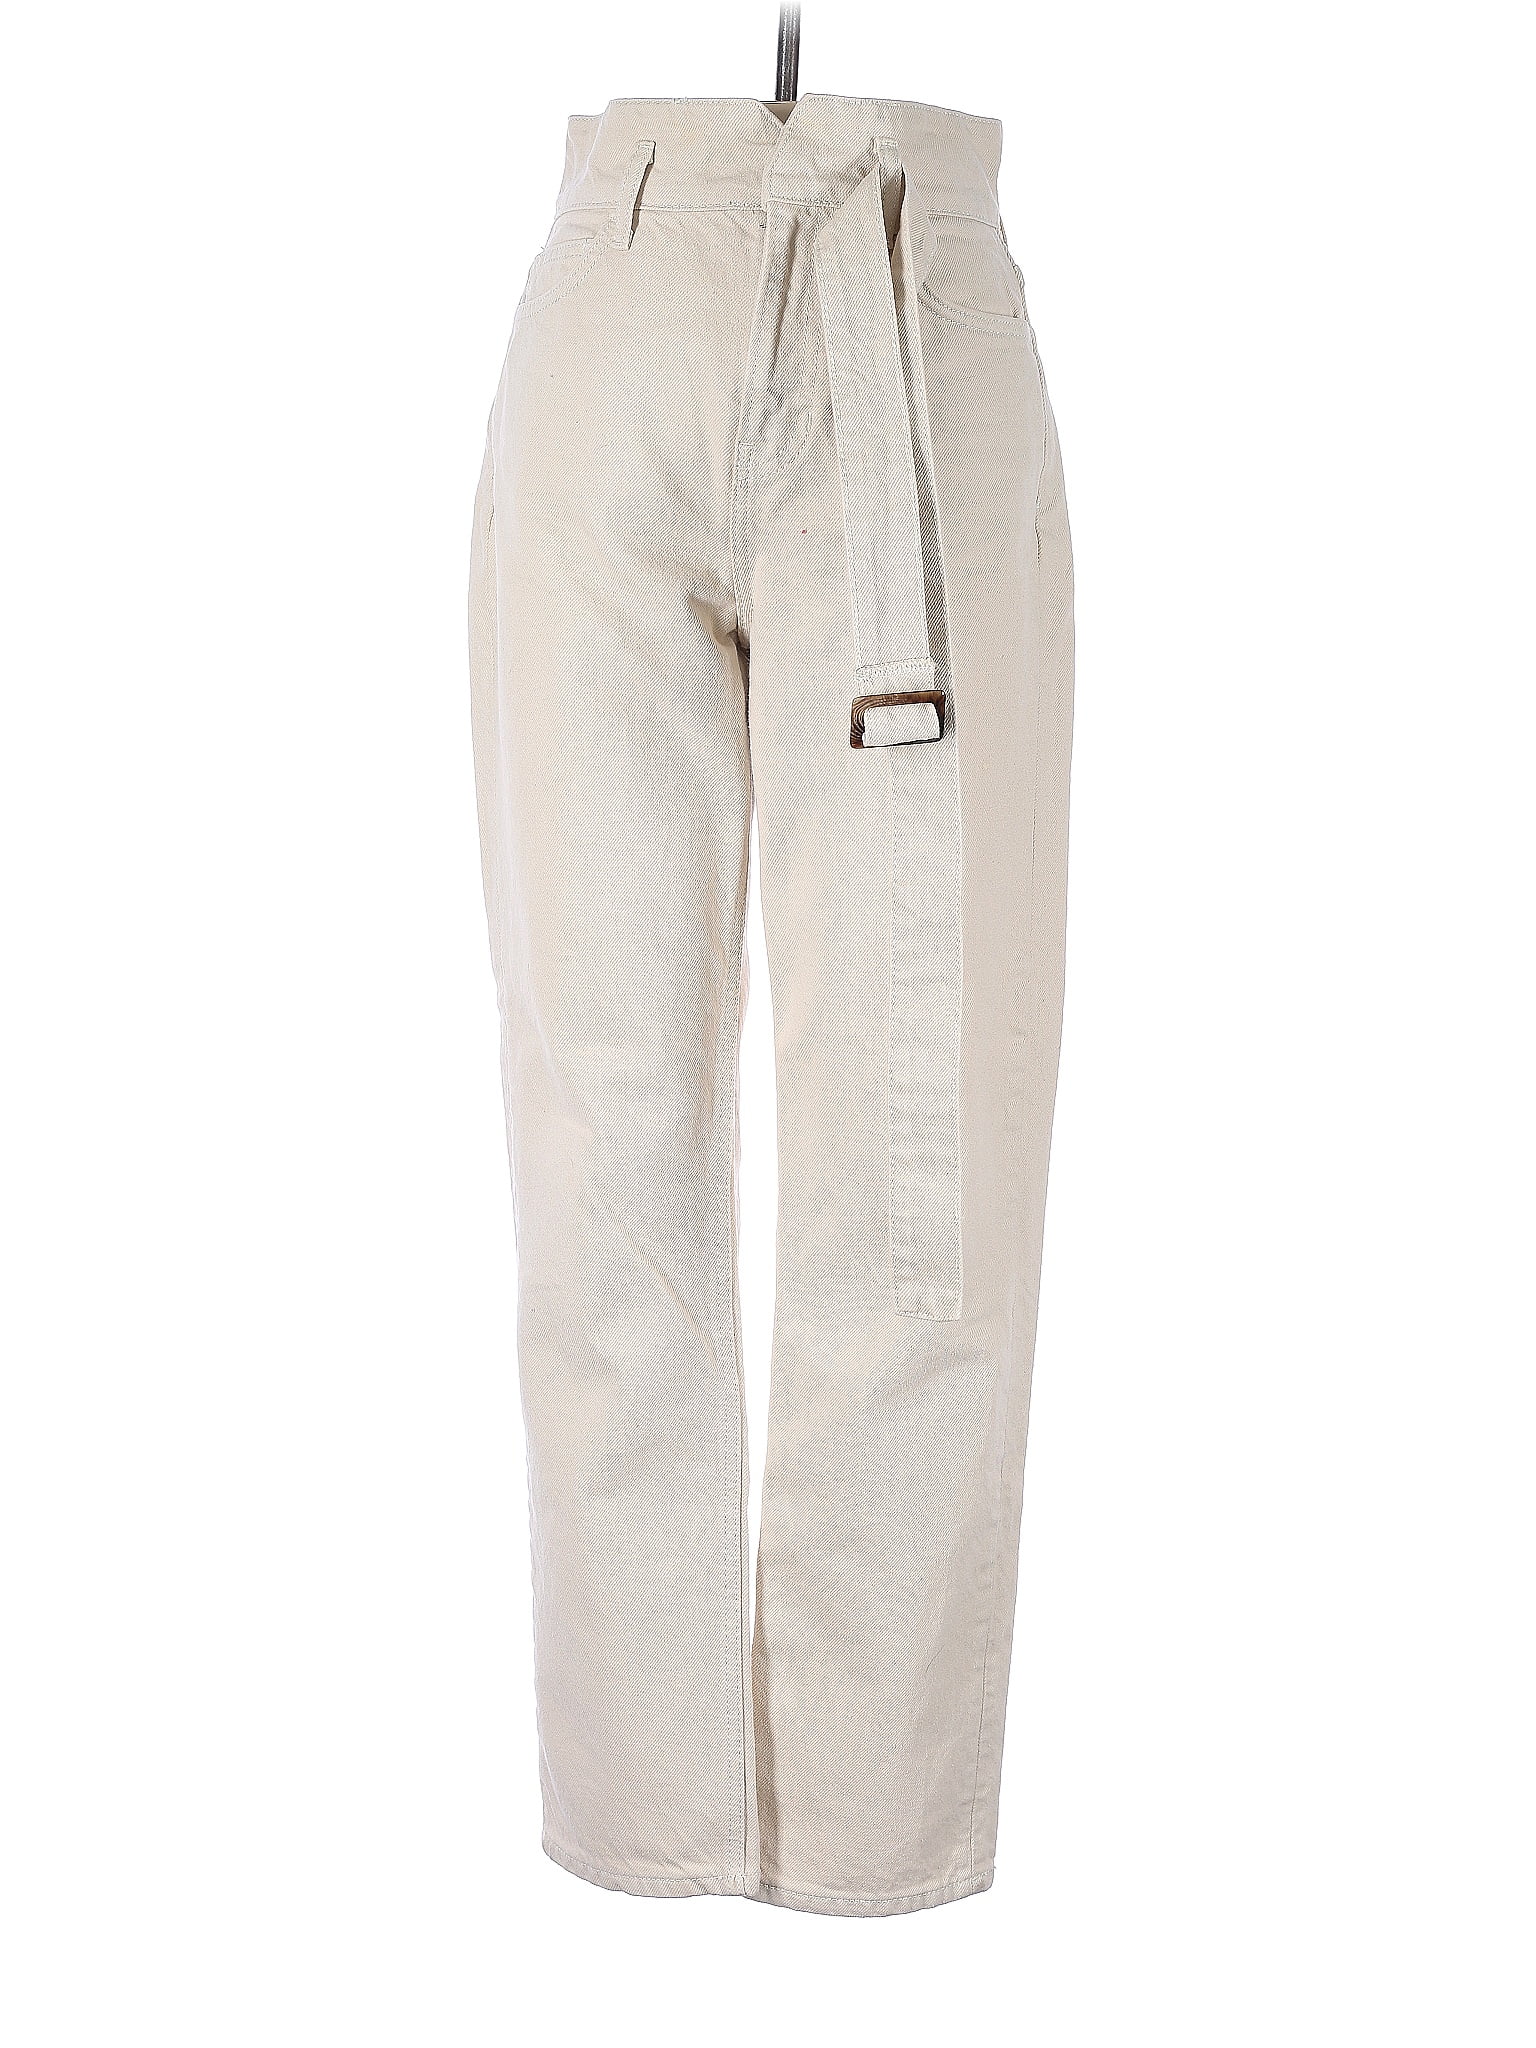 Reformation Jeans 100% Cotton Solid Ivory Jeans 24 Waist - 74% off ...